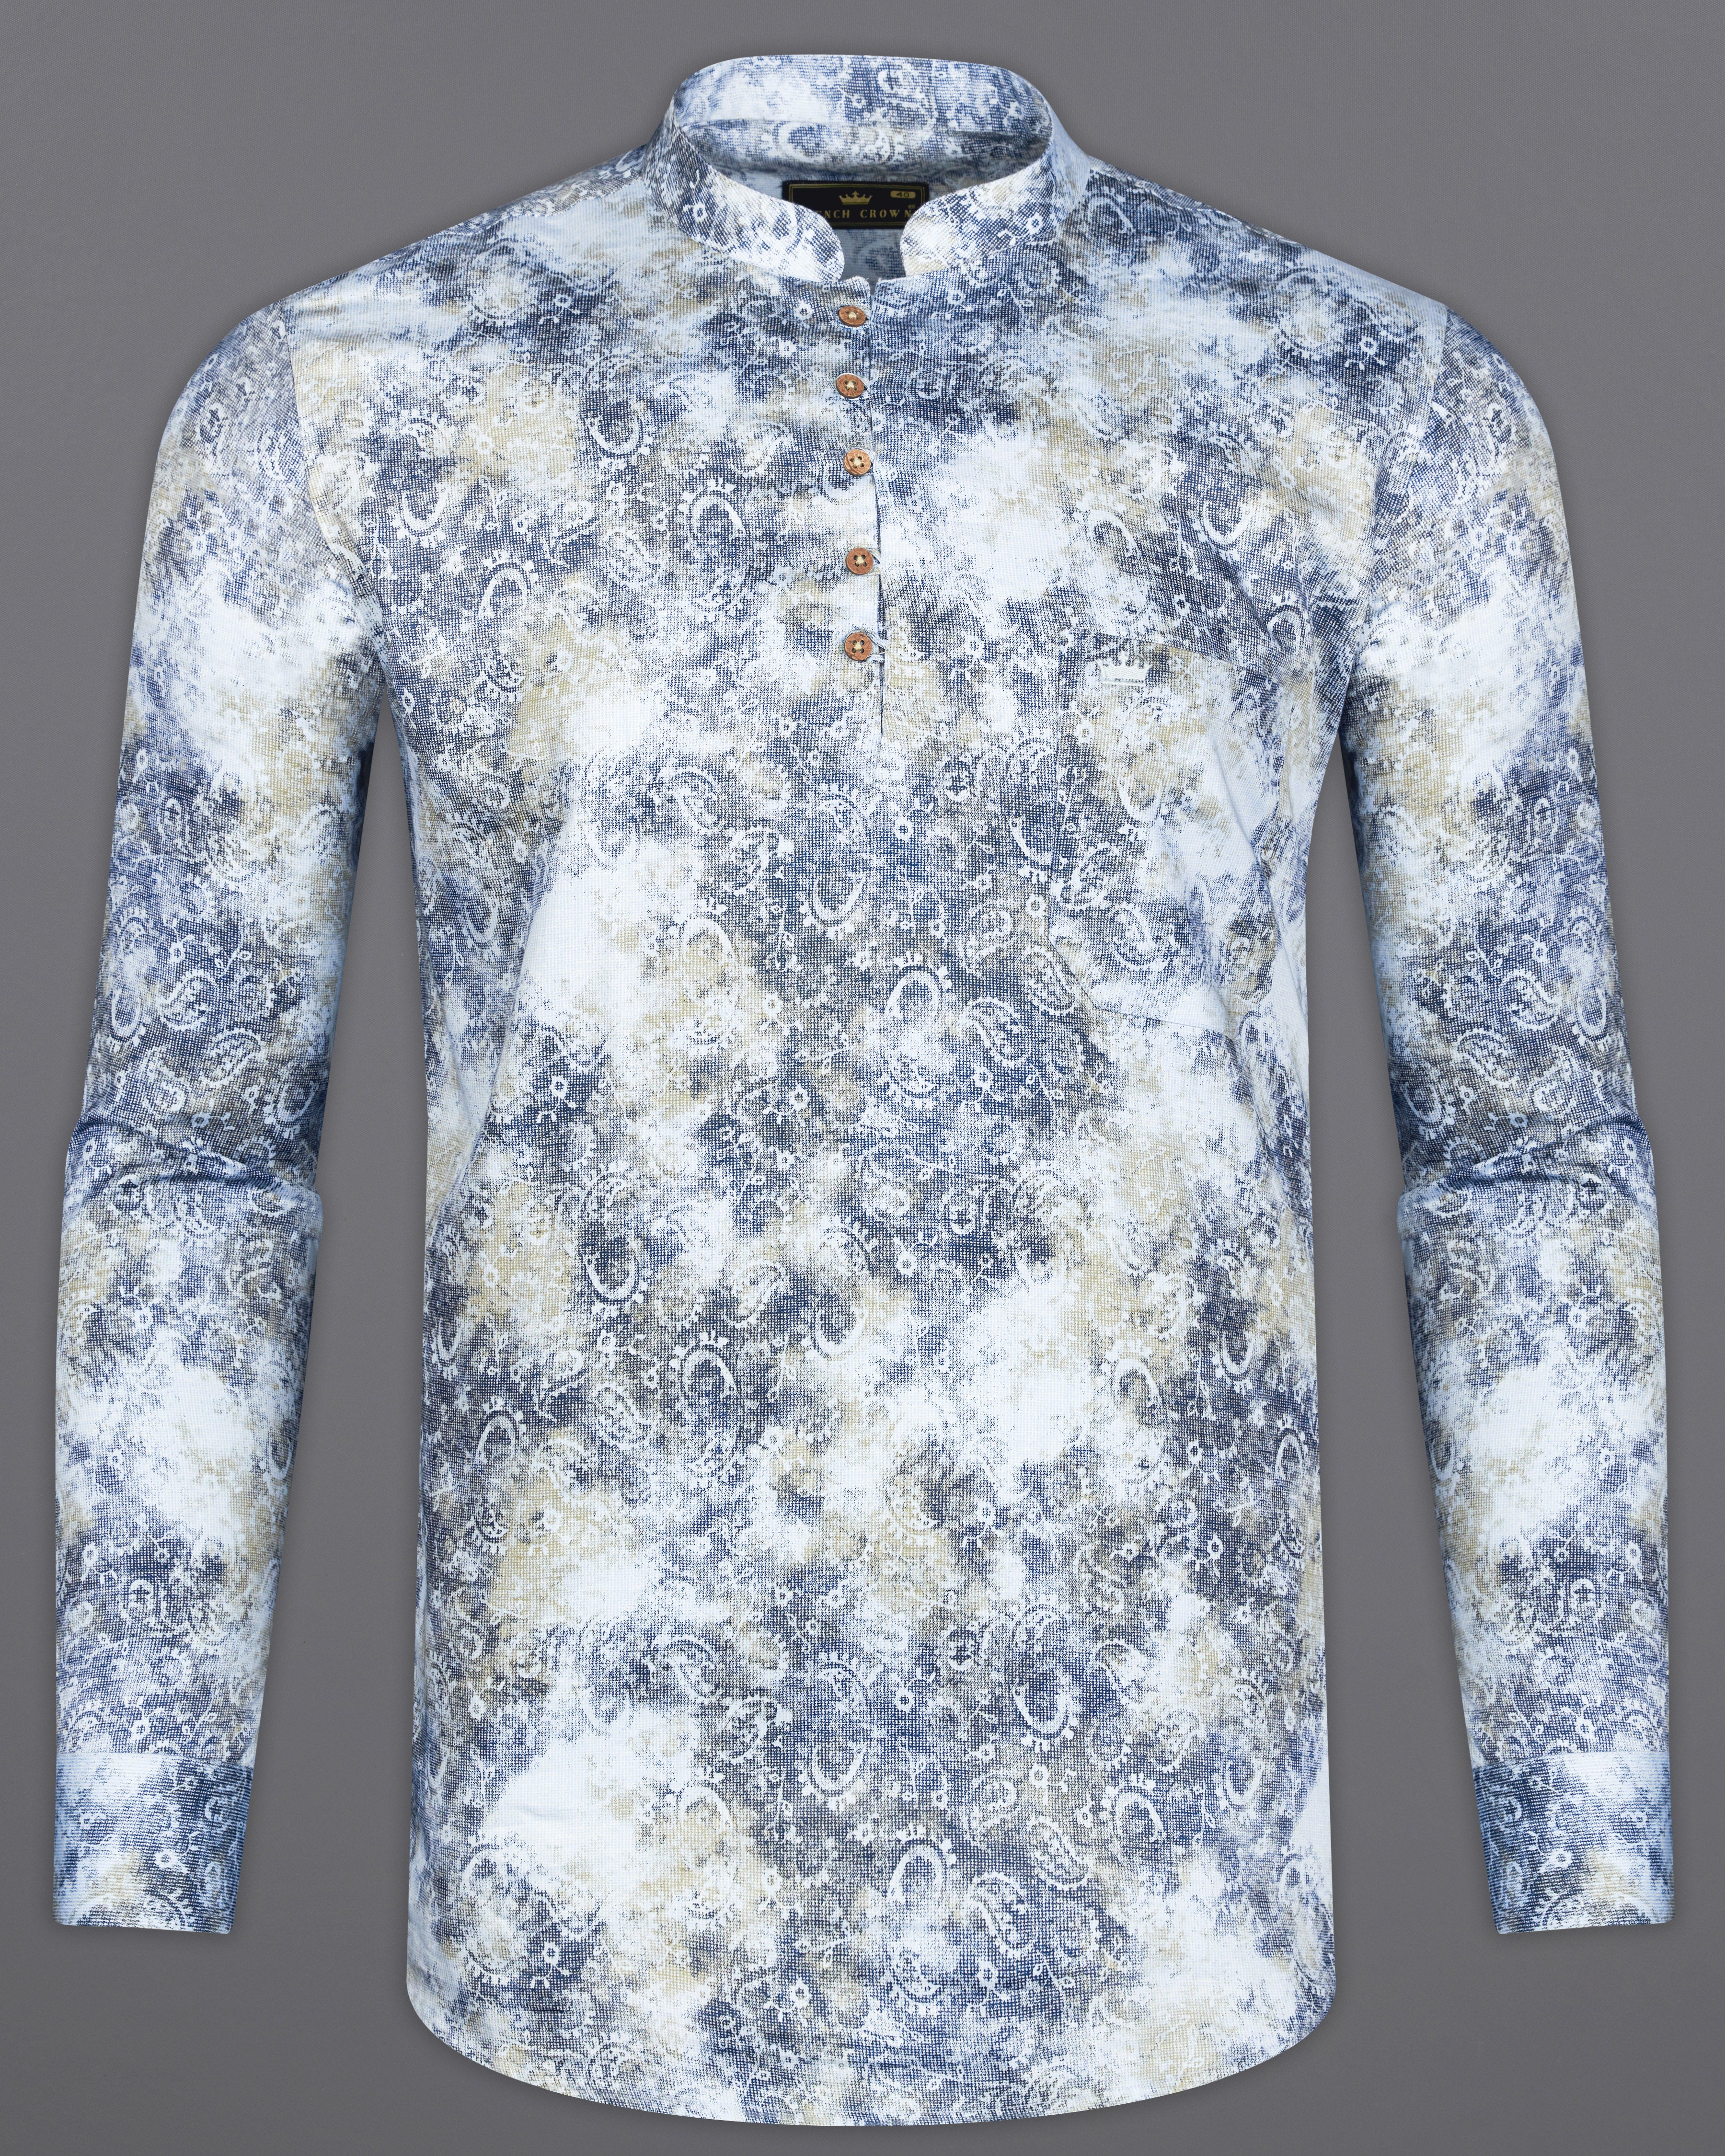 Bright White with Bison Hide Brown and East Bay Blue Paisley Printed Premium Cotton Kurta Shirt 9899-KS-38, 9899-KS-H-38, 9899-KS-39, 9899-KS-H-39, 9899-KS-40, 9899-KS-H-40, 9899-KS-42, 9899-KS-H-42, 9899-KS-44, 9899-KS-H-44, 9899-KS-46, 9899-KS-H-46, 9899-KS-48, 9899-KS-H-48, 9899-KS-50, 9899-KS-H-50, 9899-KS-52, 9899-KS-H-52